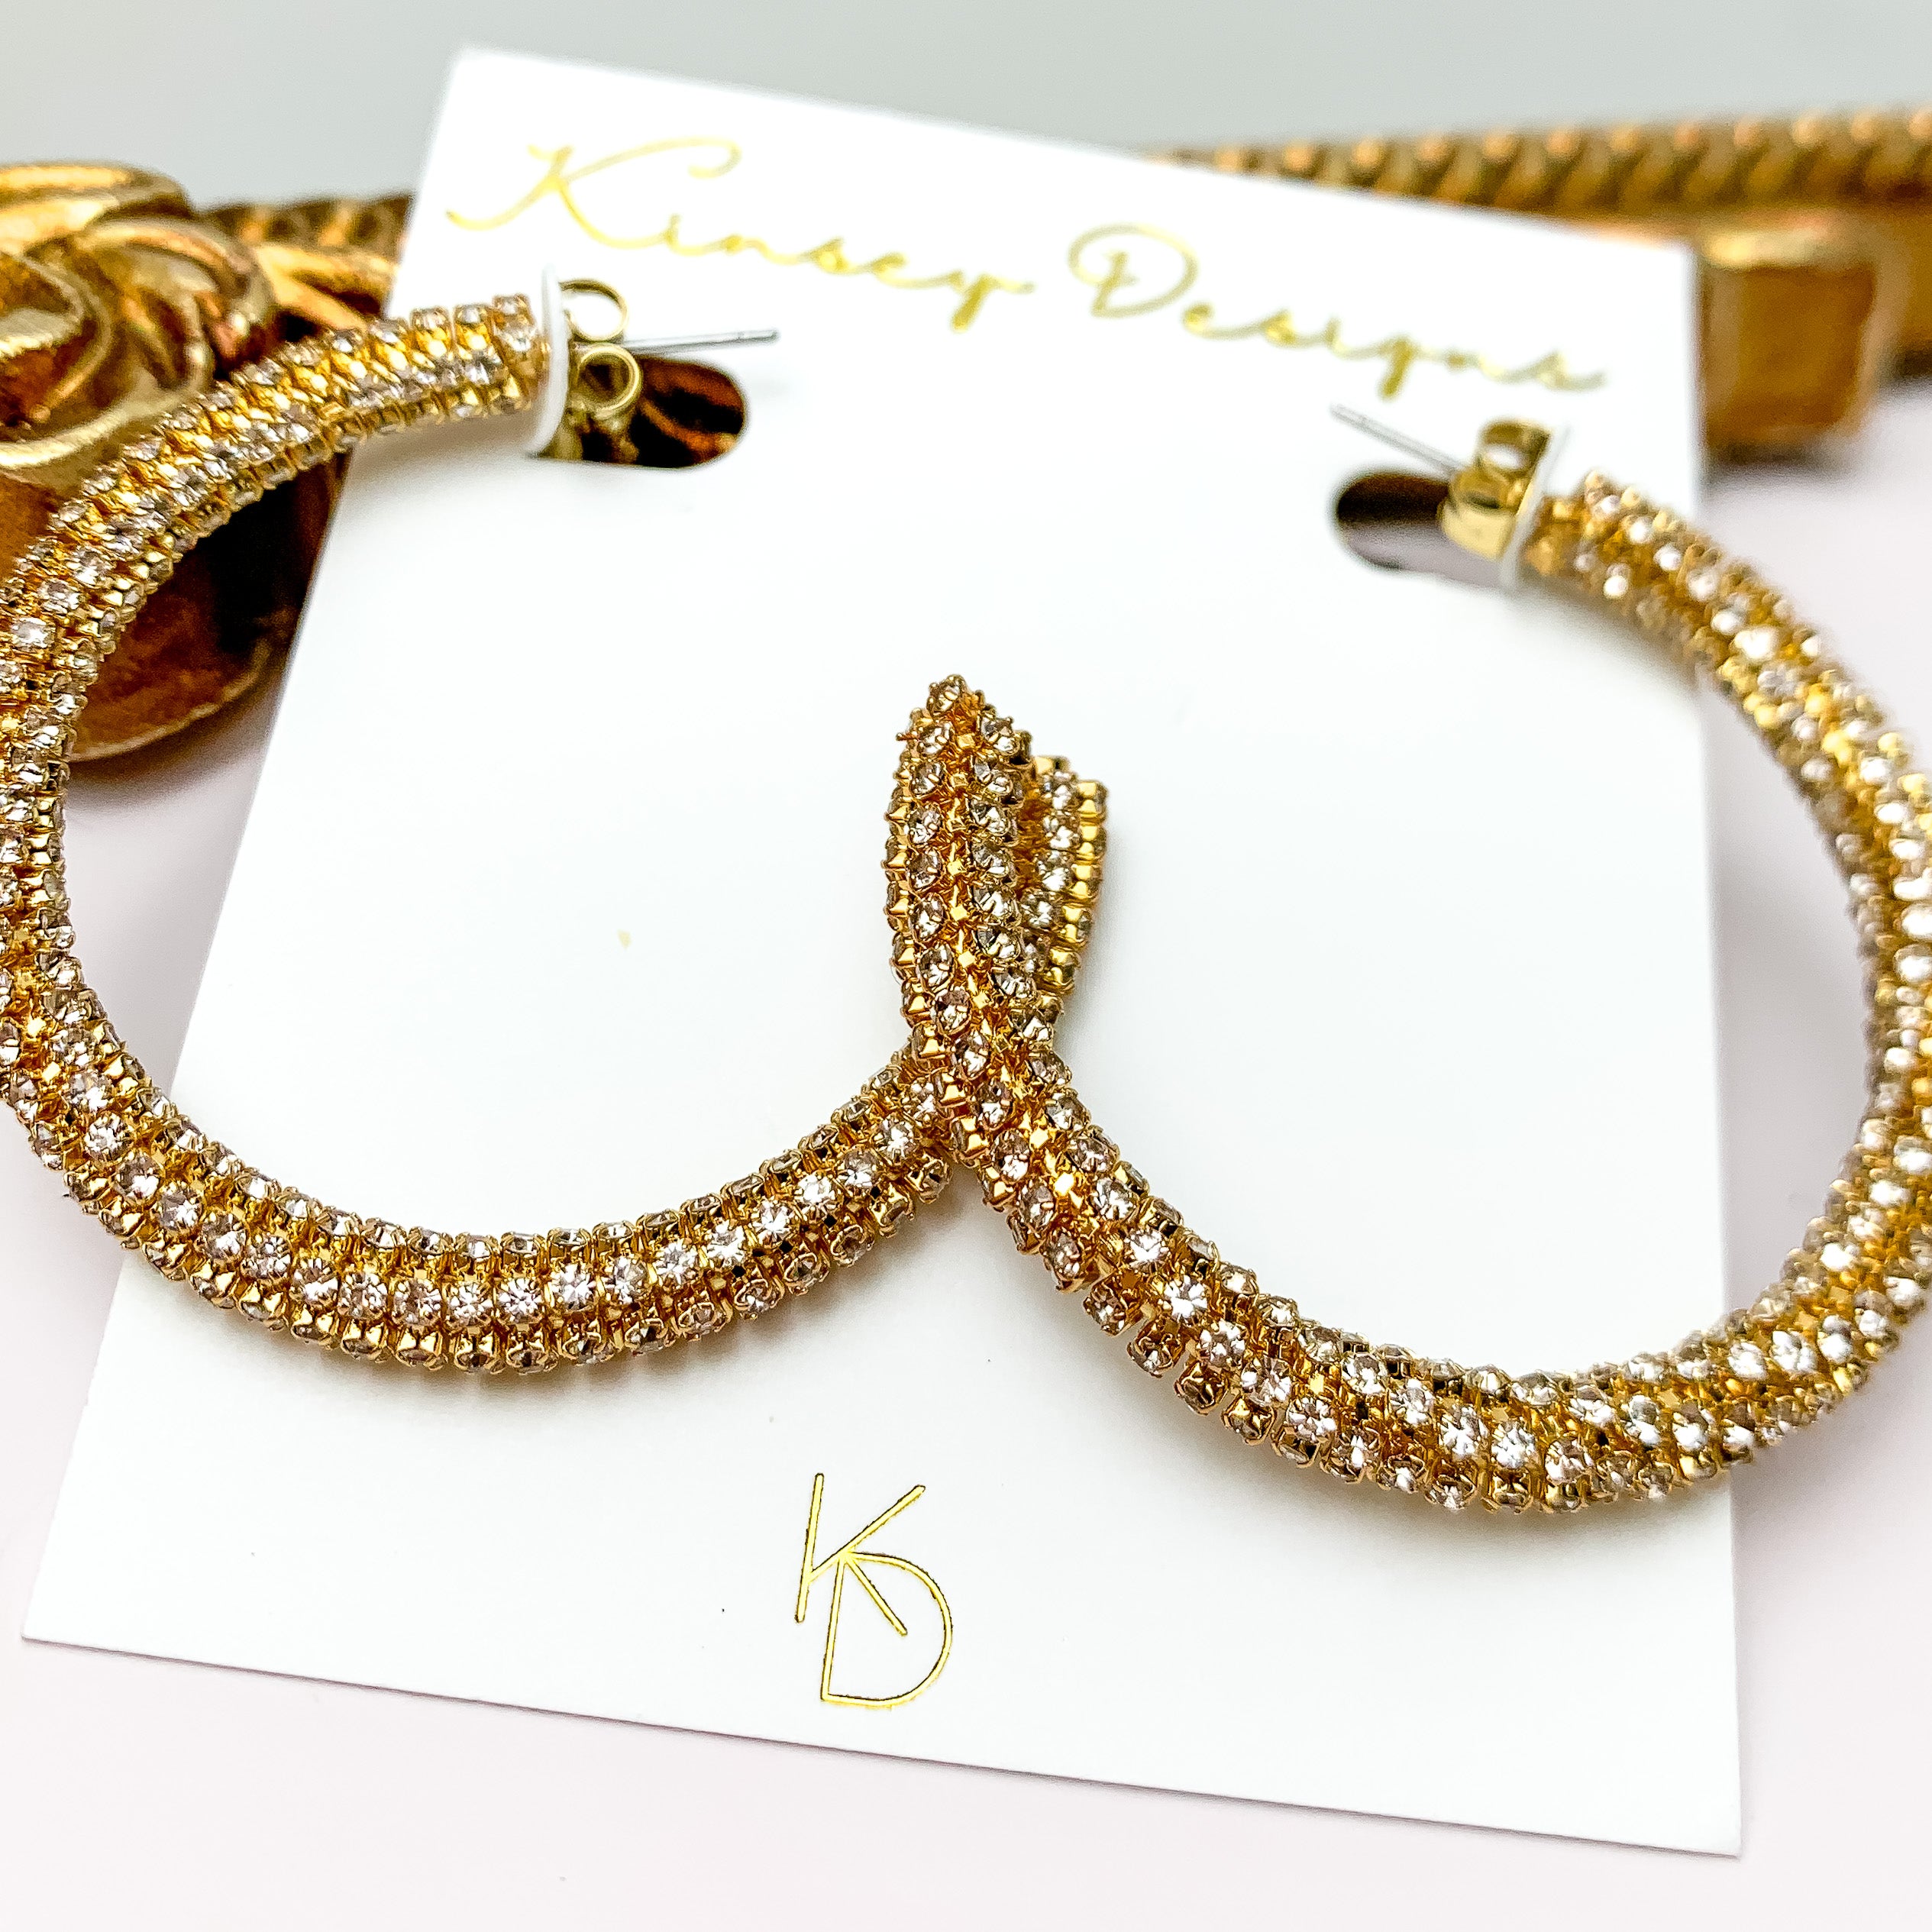 Kinsey Designs | Riley Hoop Earrings with CZ Crystals - Giddy Up Glamour Boutique